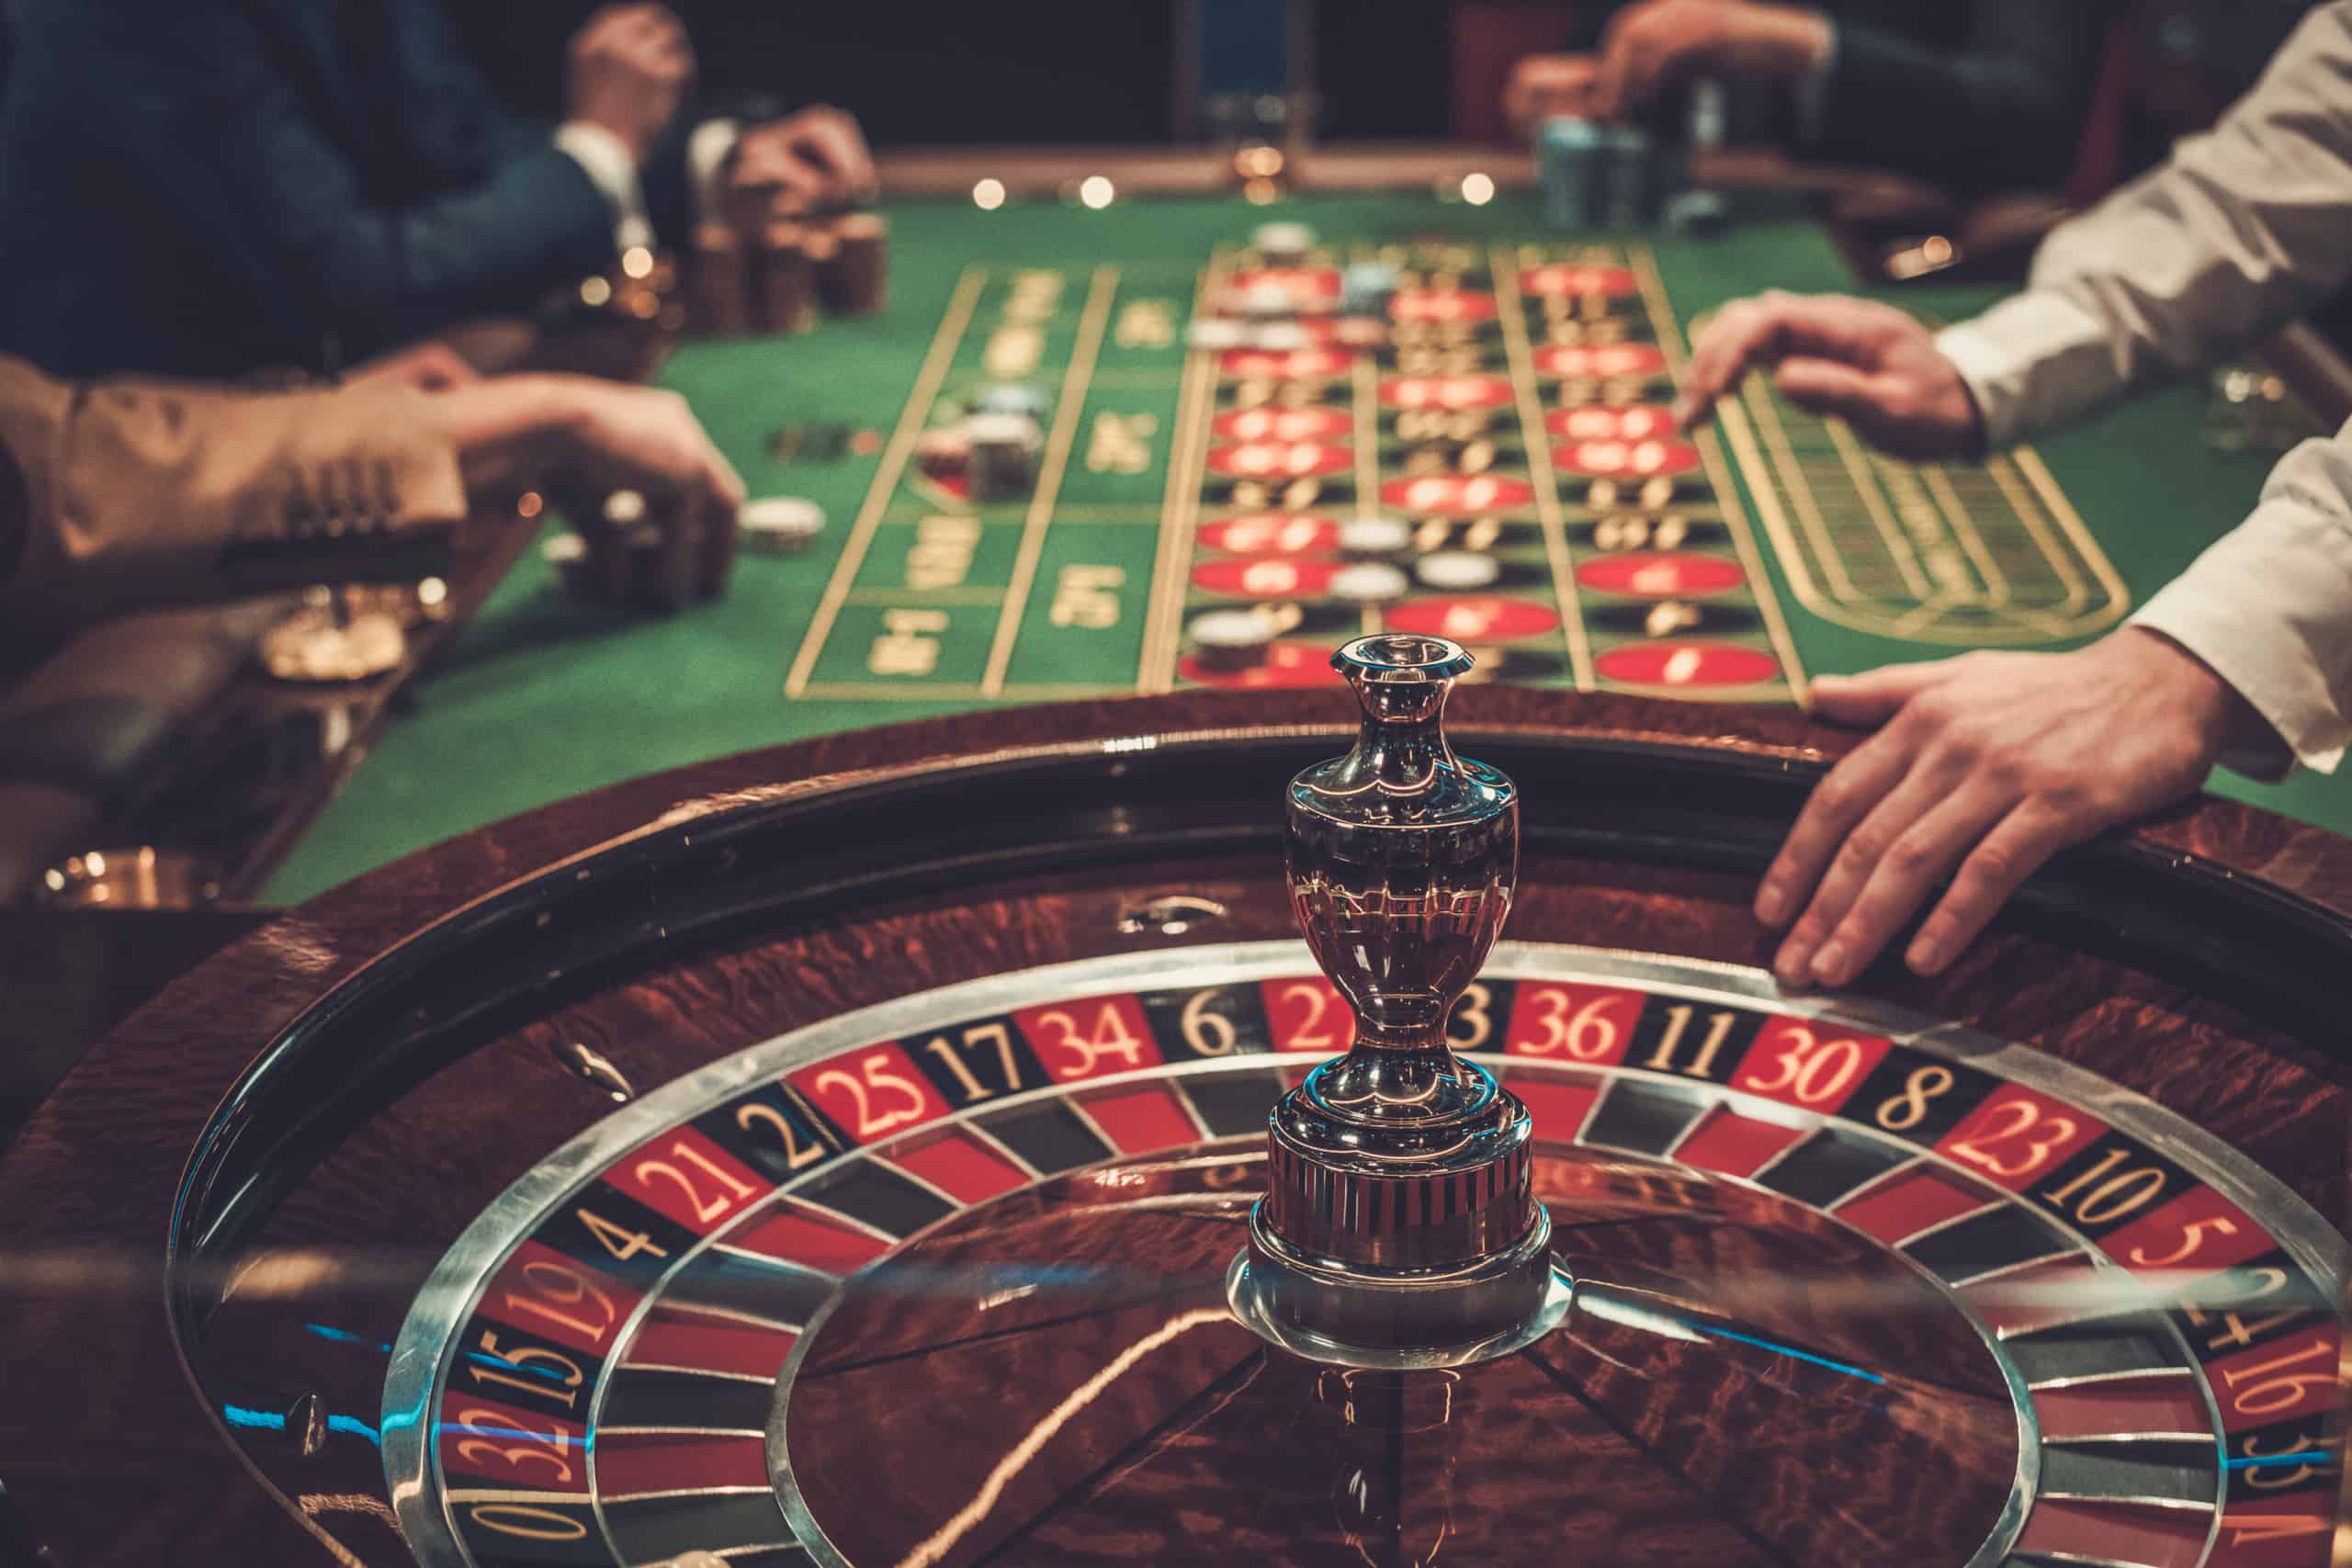 Why casino Is No Friend To Small Business